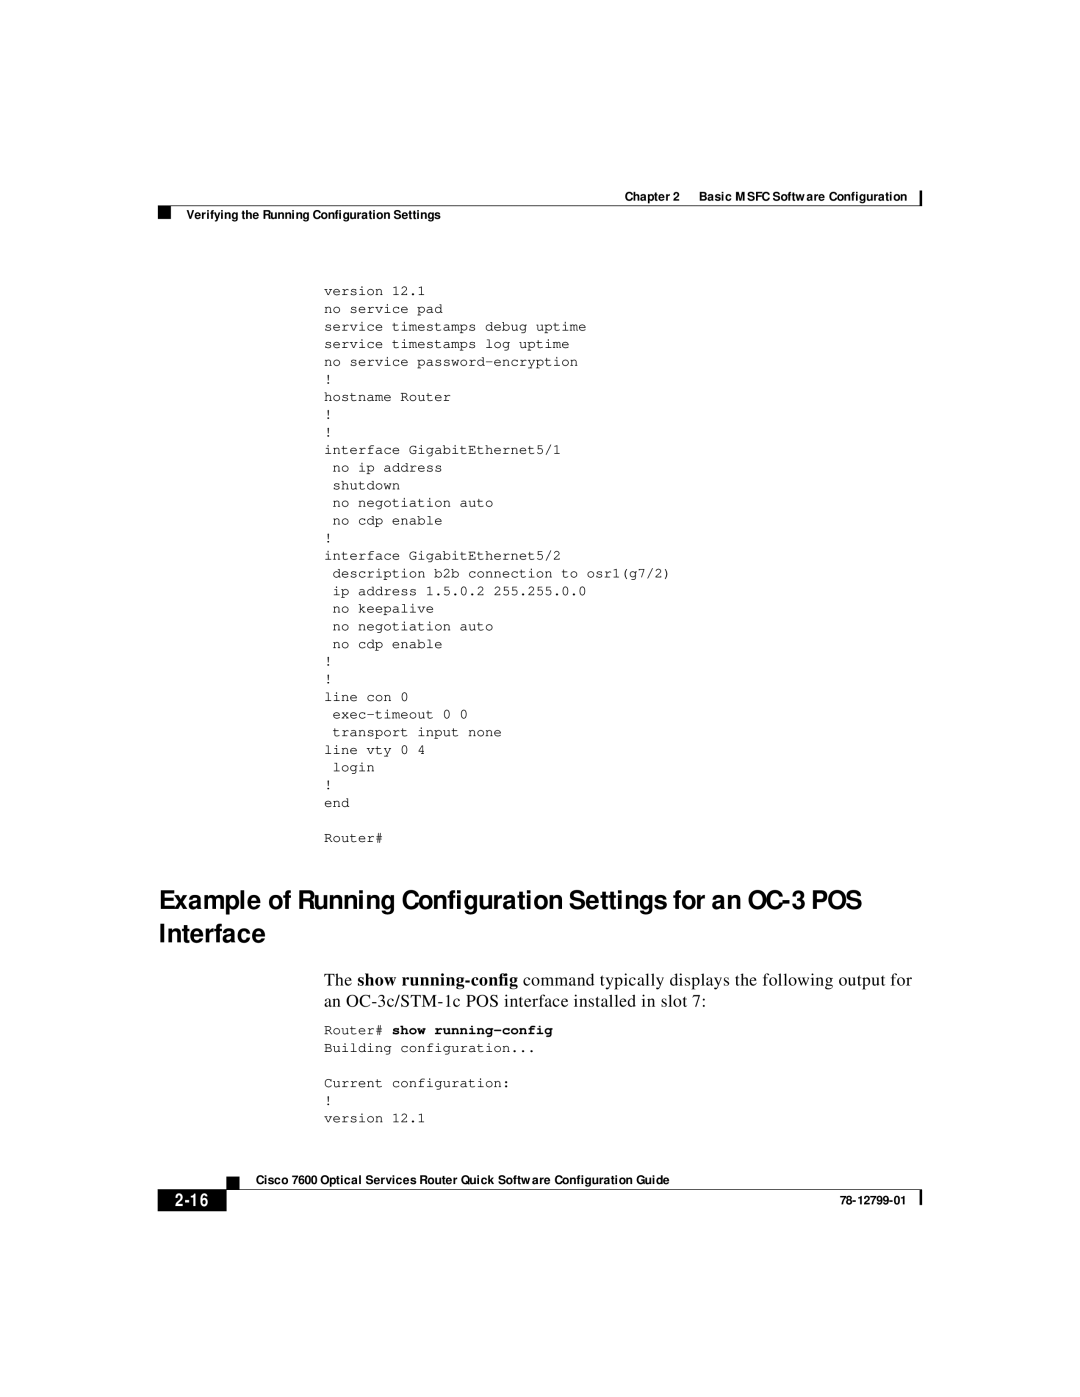 Cisco Systems 7600 Example of Running Configuration Settings for an OC-3 POS Interface, 2-16, hostname Router, end Router# 